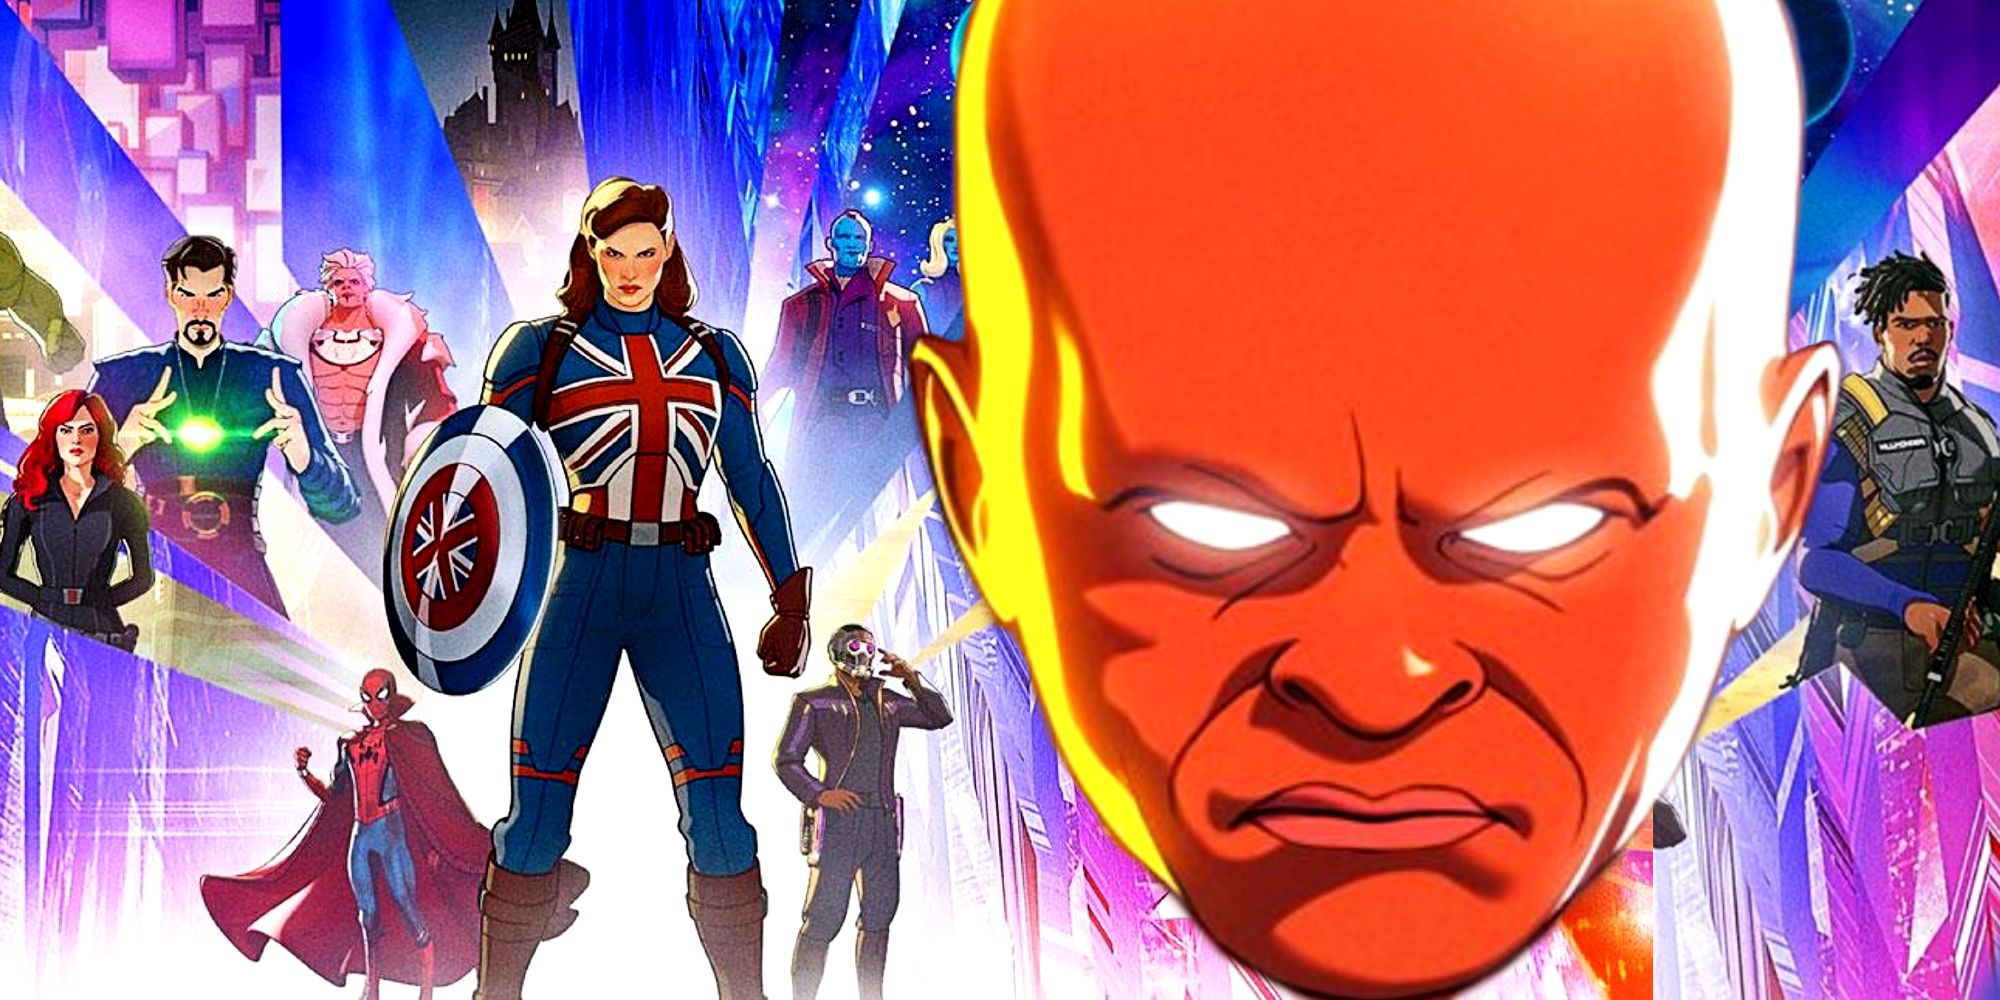 Uatu The Watcher in Marvel's What If Multiverse